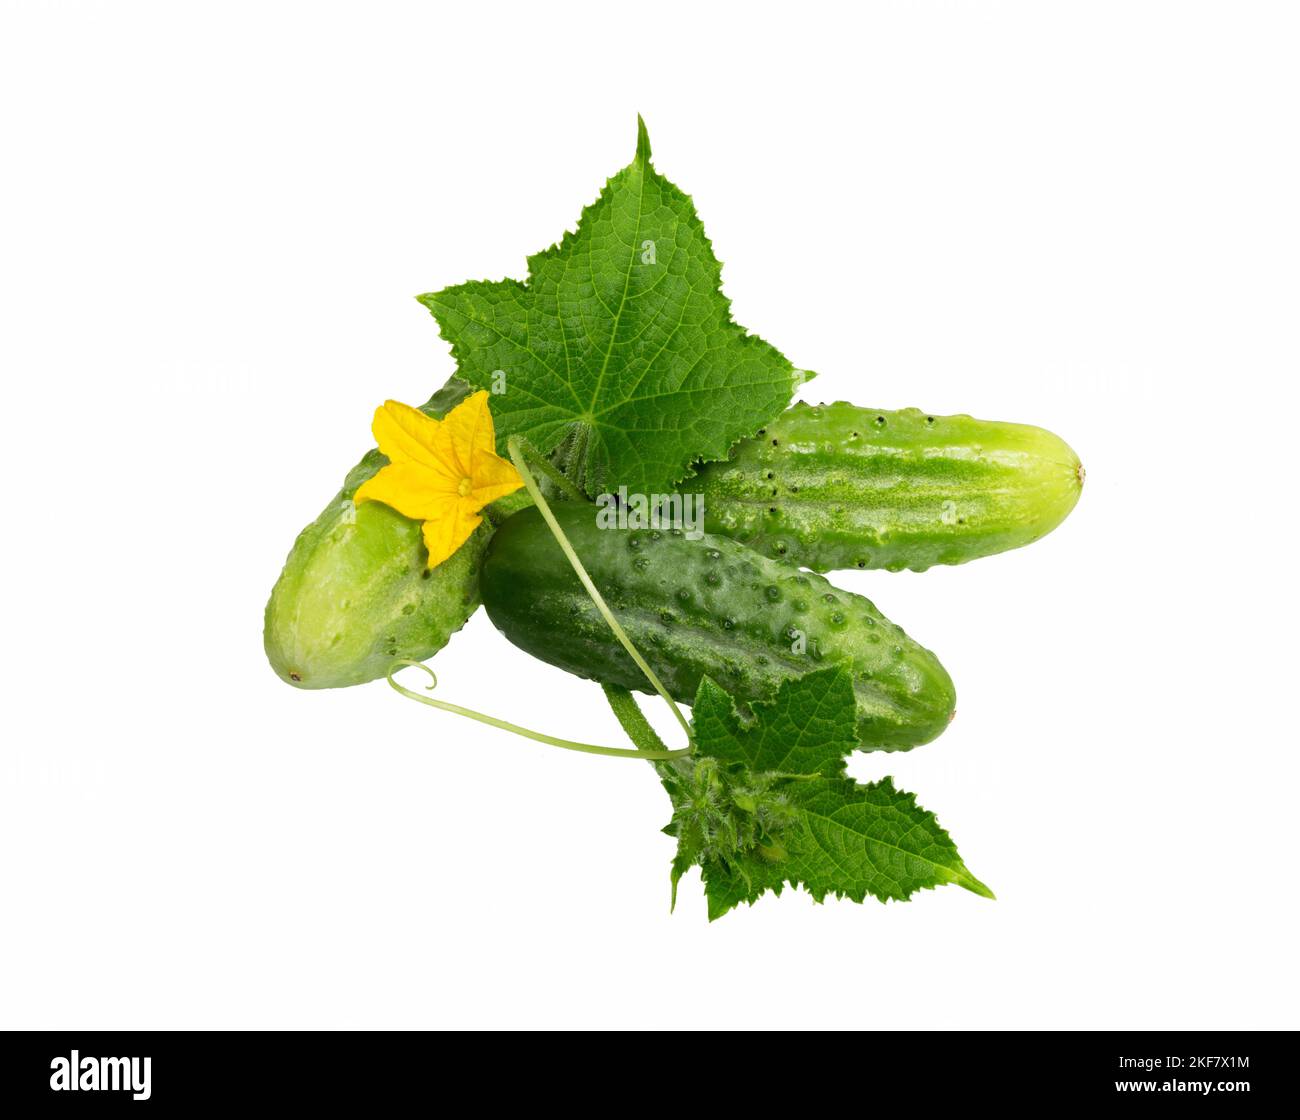 Cucumbers. Fresh green cucumber with leaf and flower isolated on white background. Natural vegetables organic food. Stock Photo